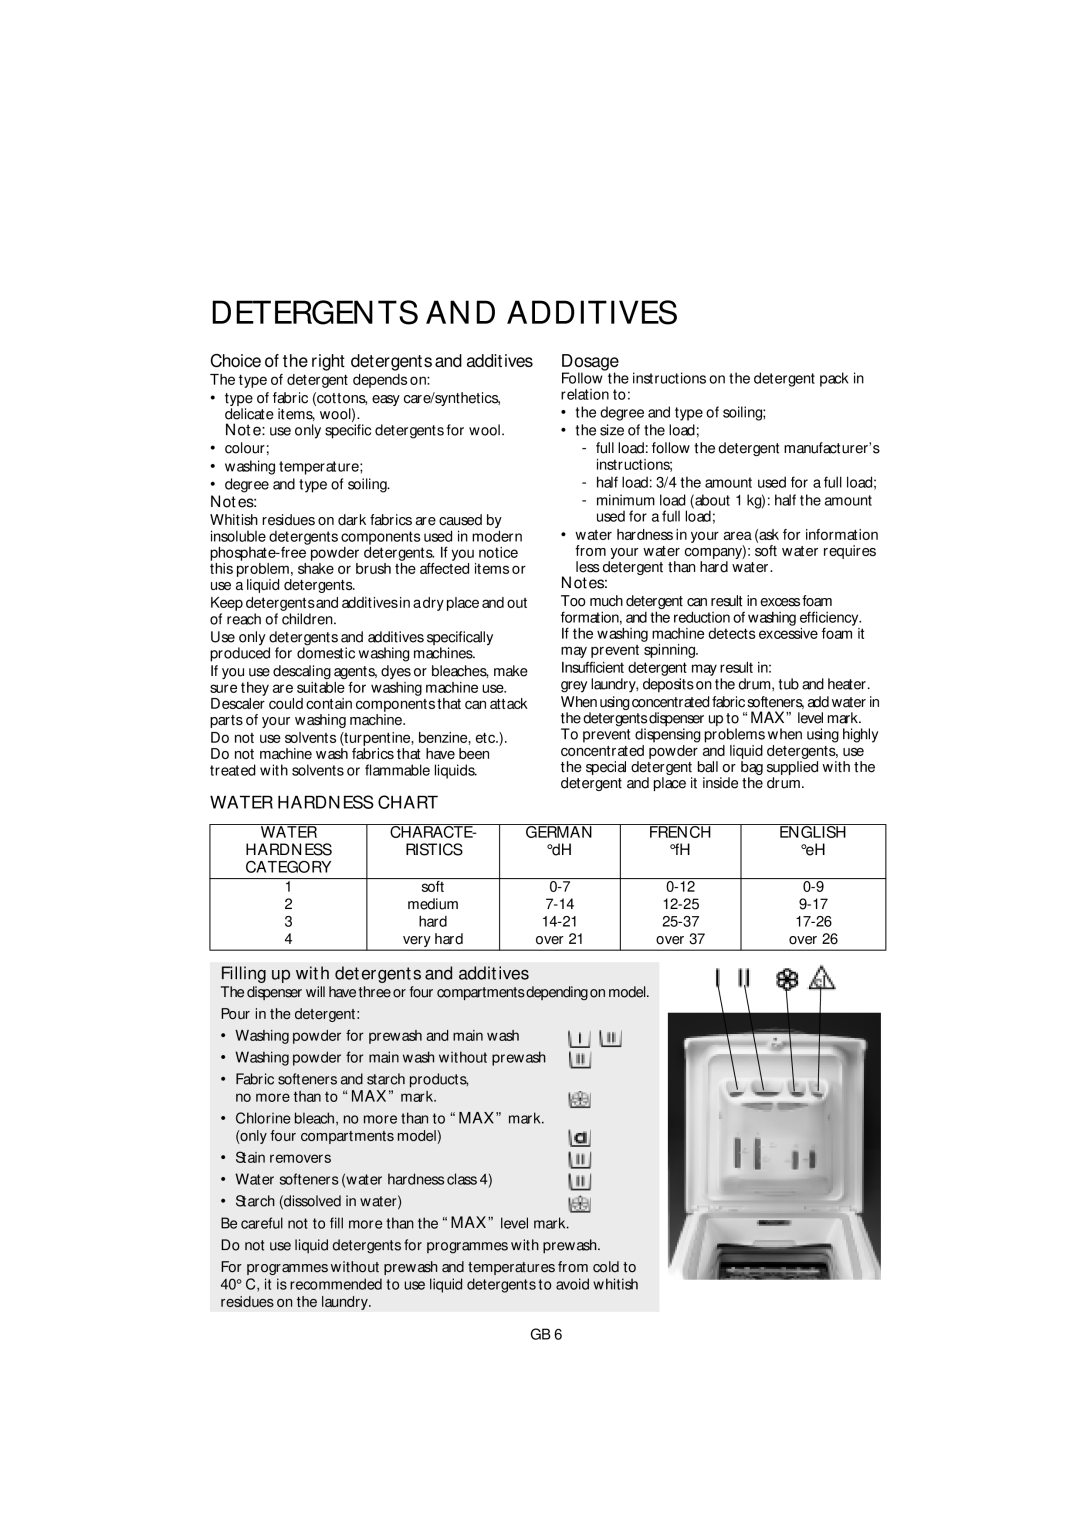 Smeg GB ST L80 Detergents And Additives, Dosage, Water Hardness Chart, Filling up with detergents and additives, Characte 